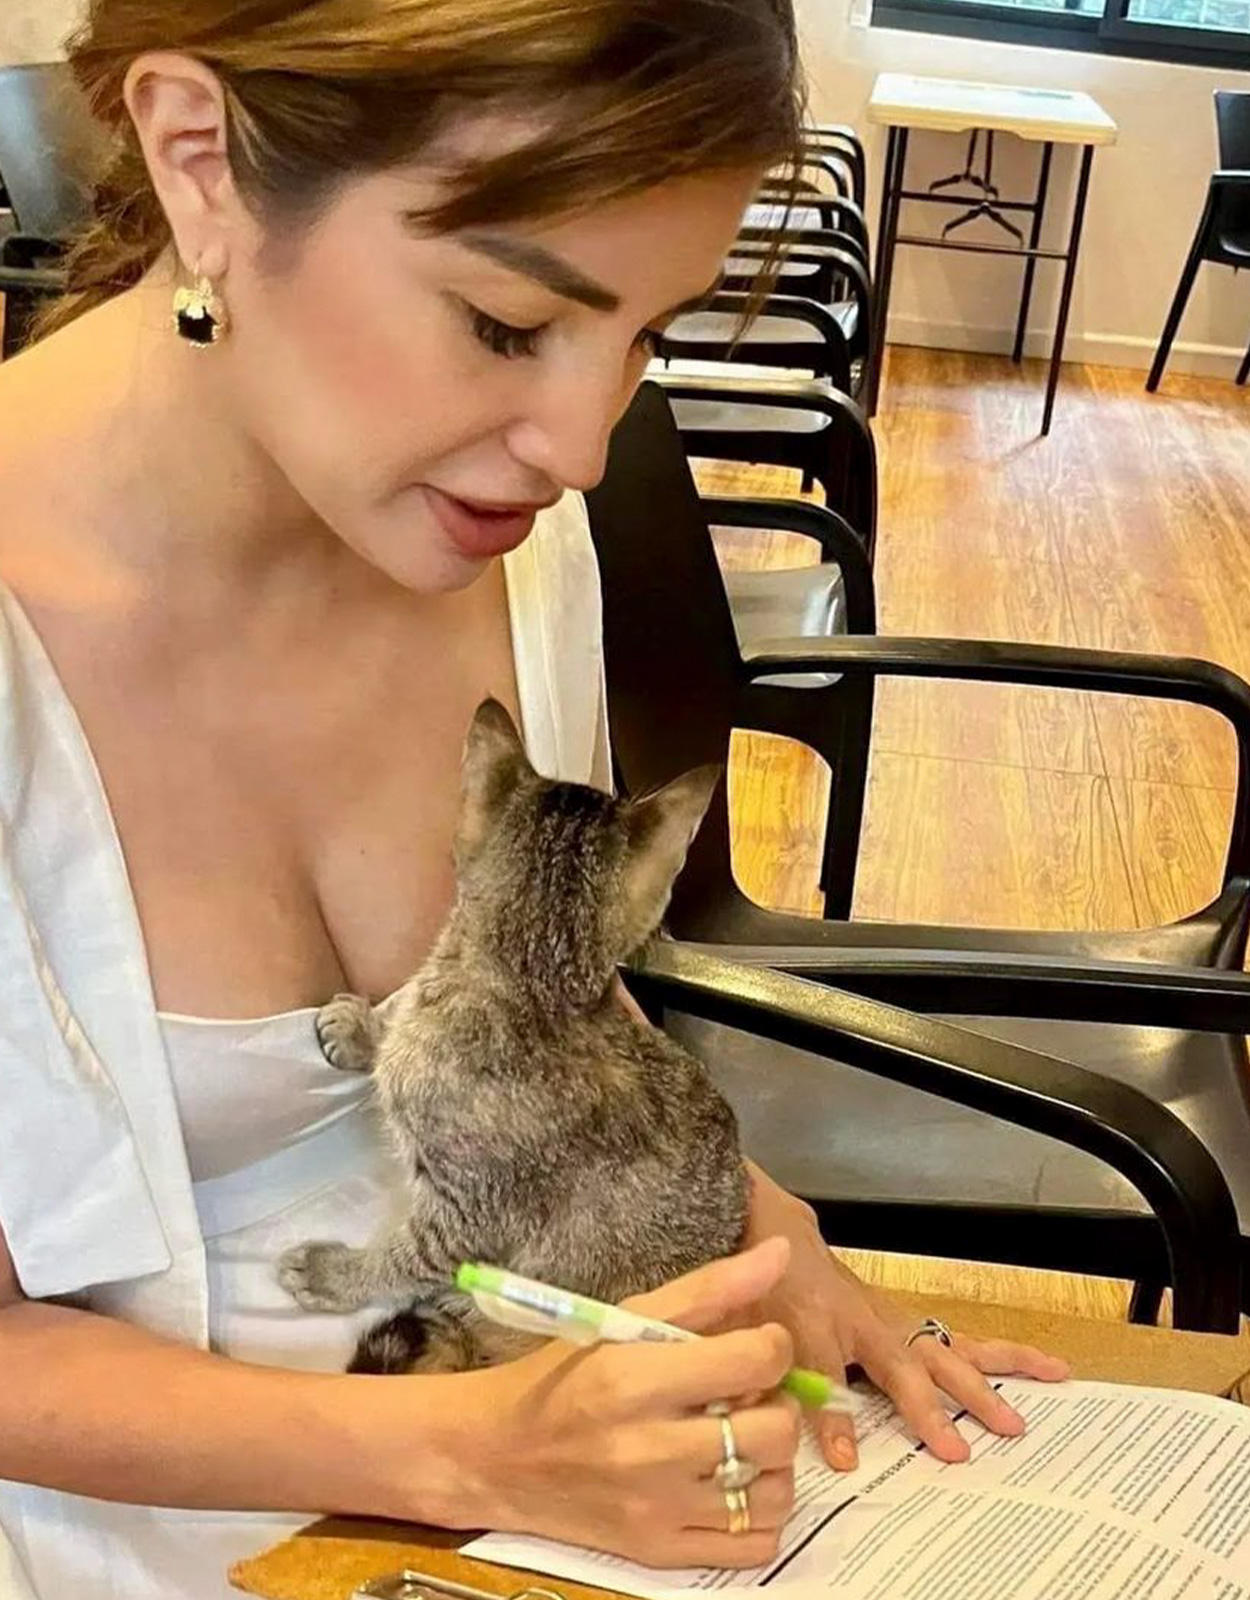 Nathalie Hart with her new cat